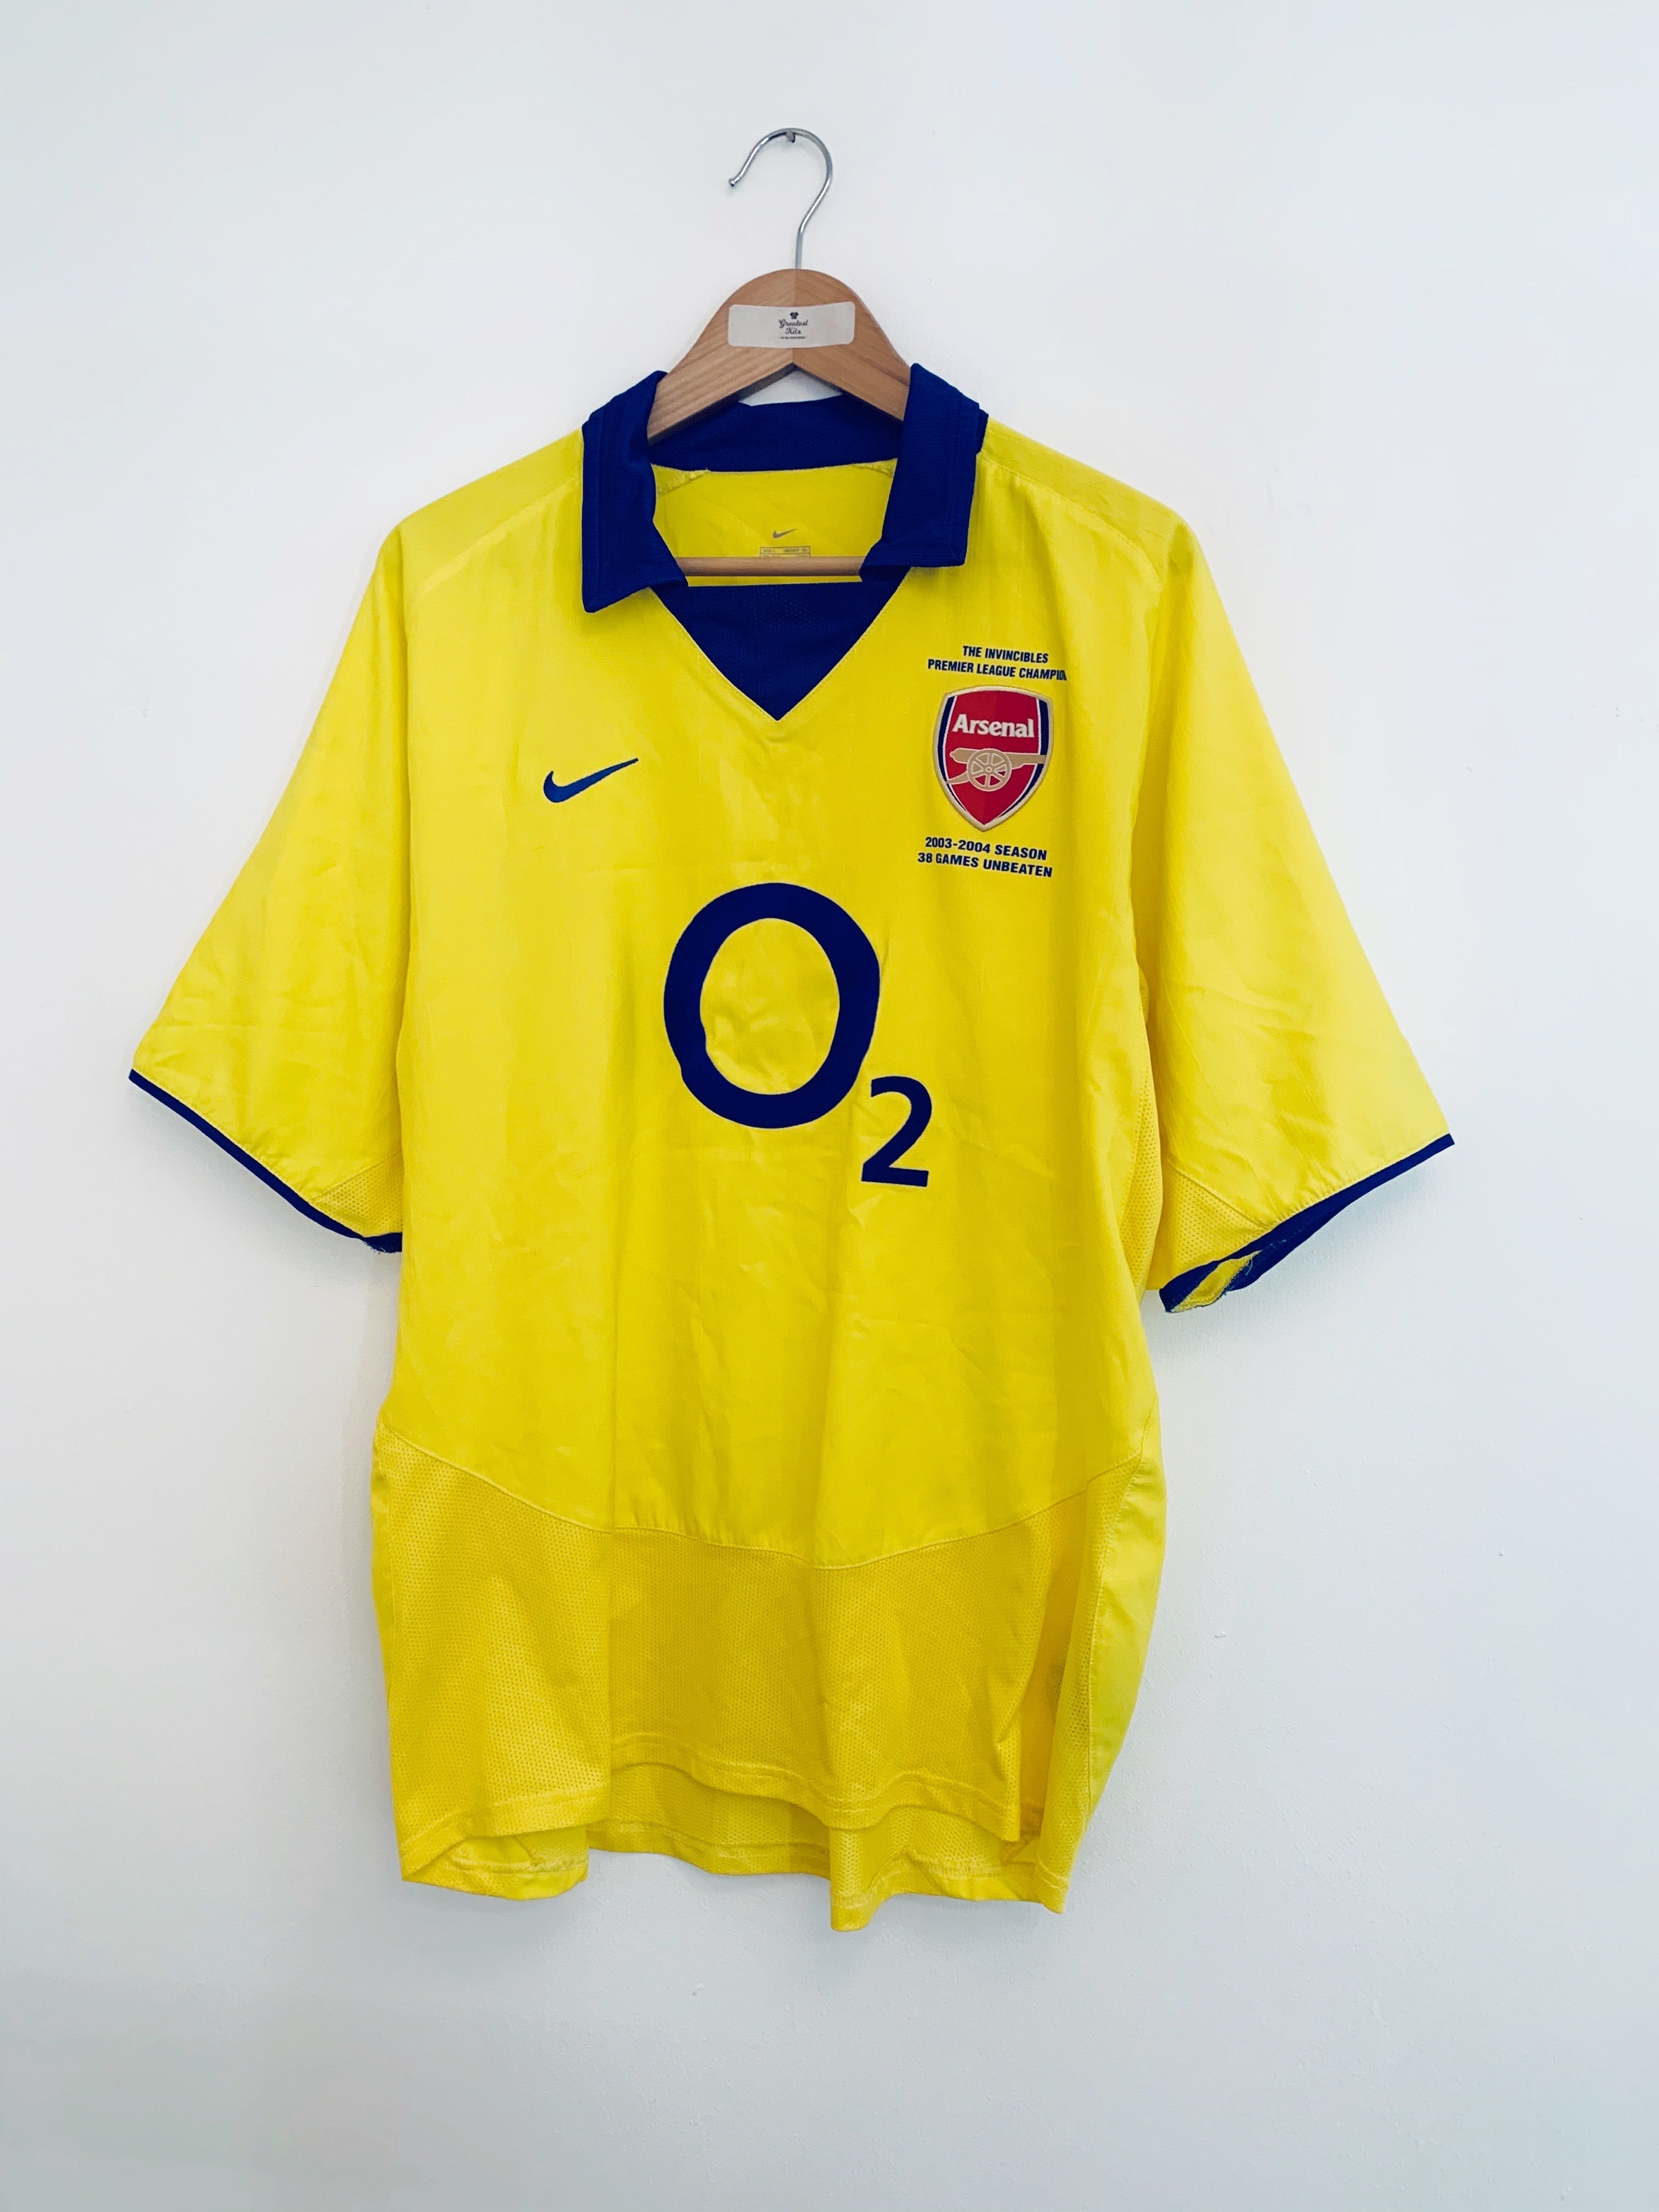 arsenal invincibles jersey